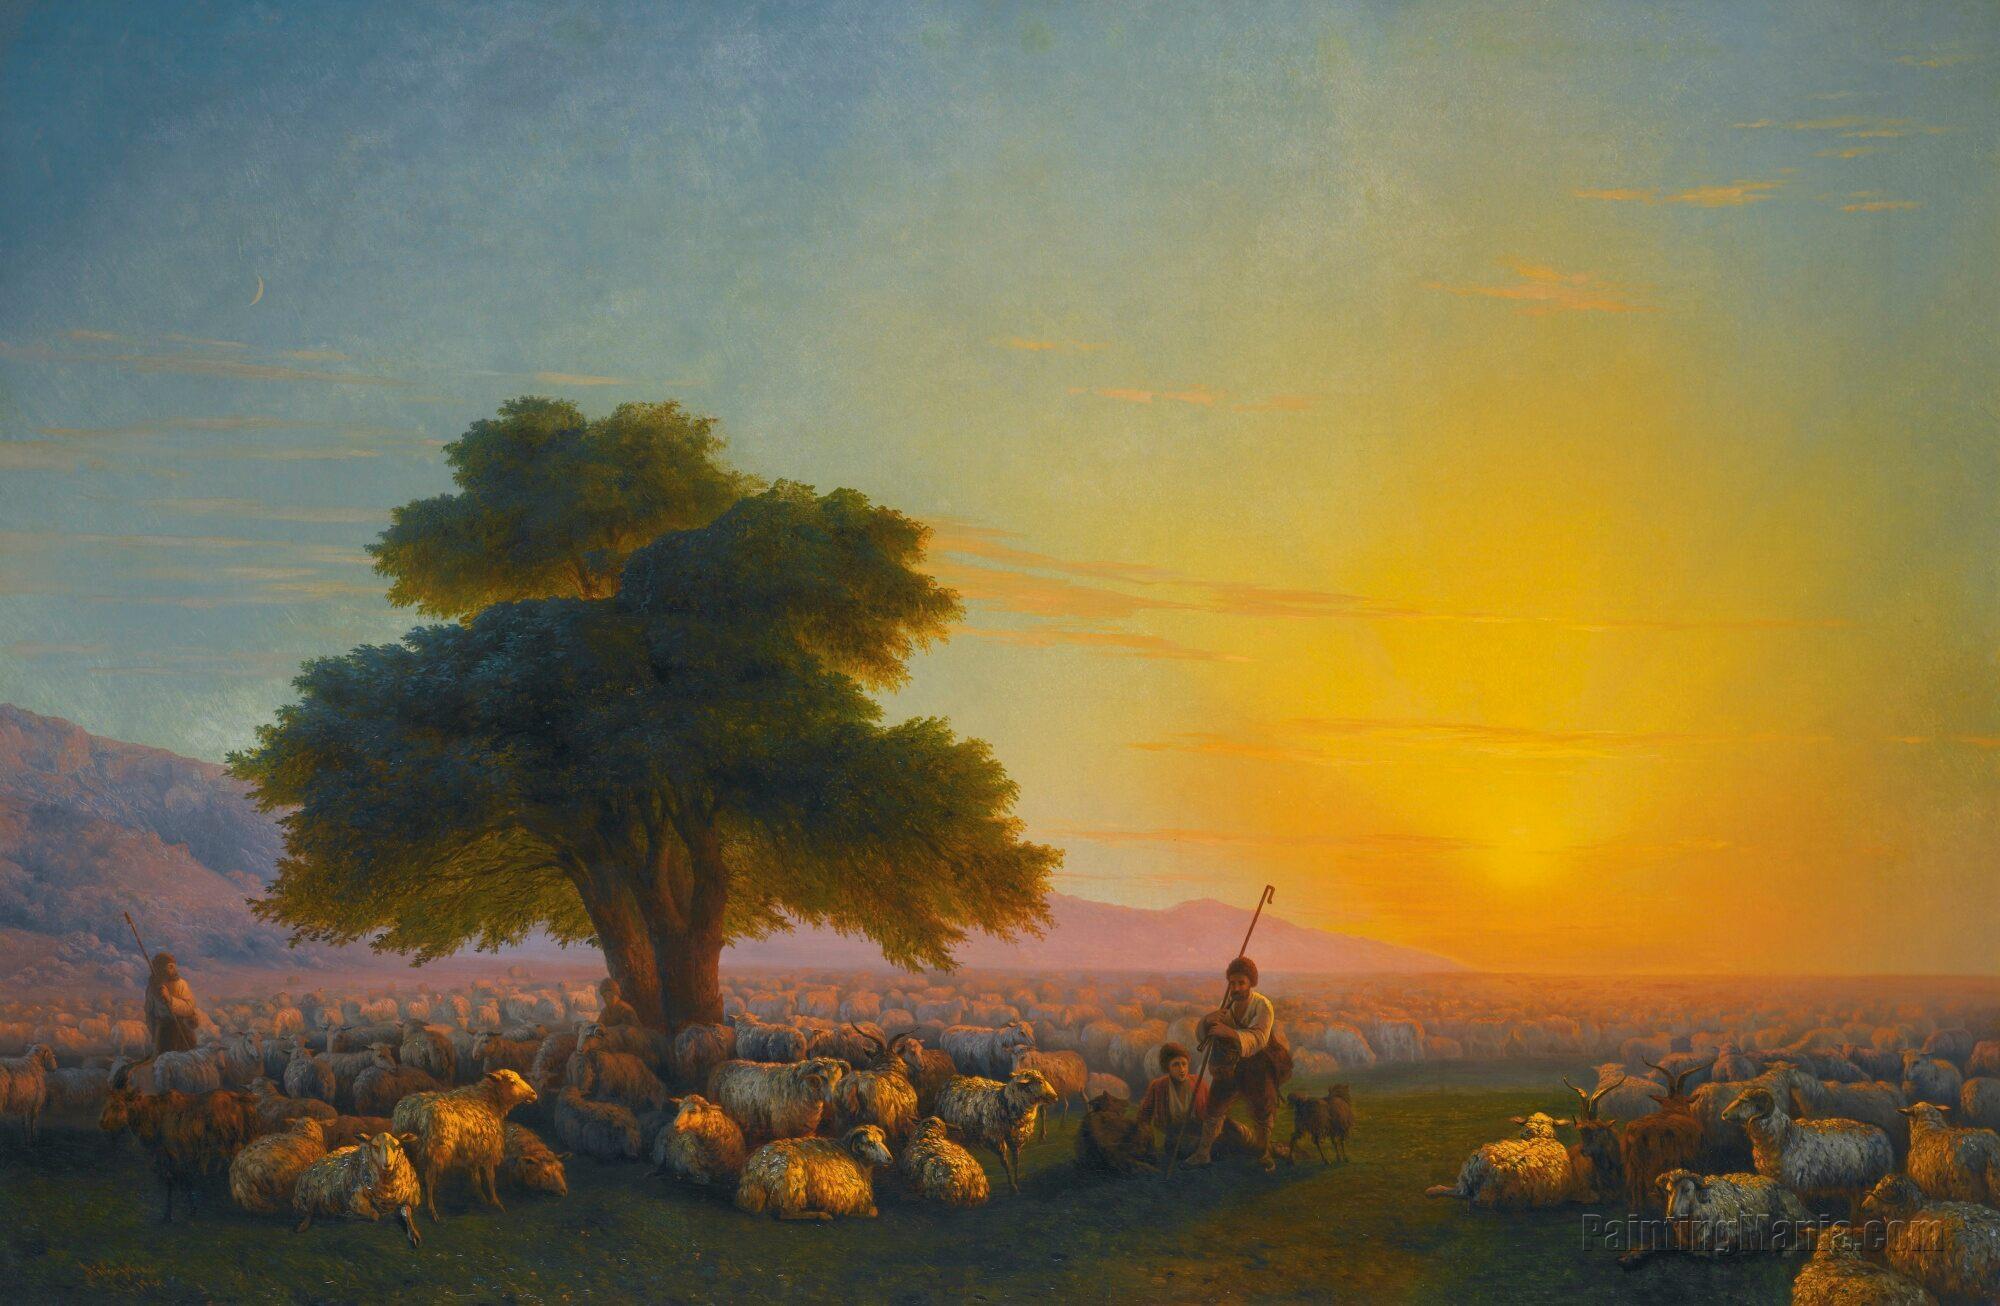 Shepherds with Their Flock at Sunset